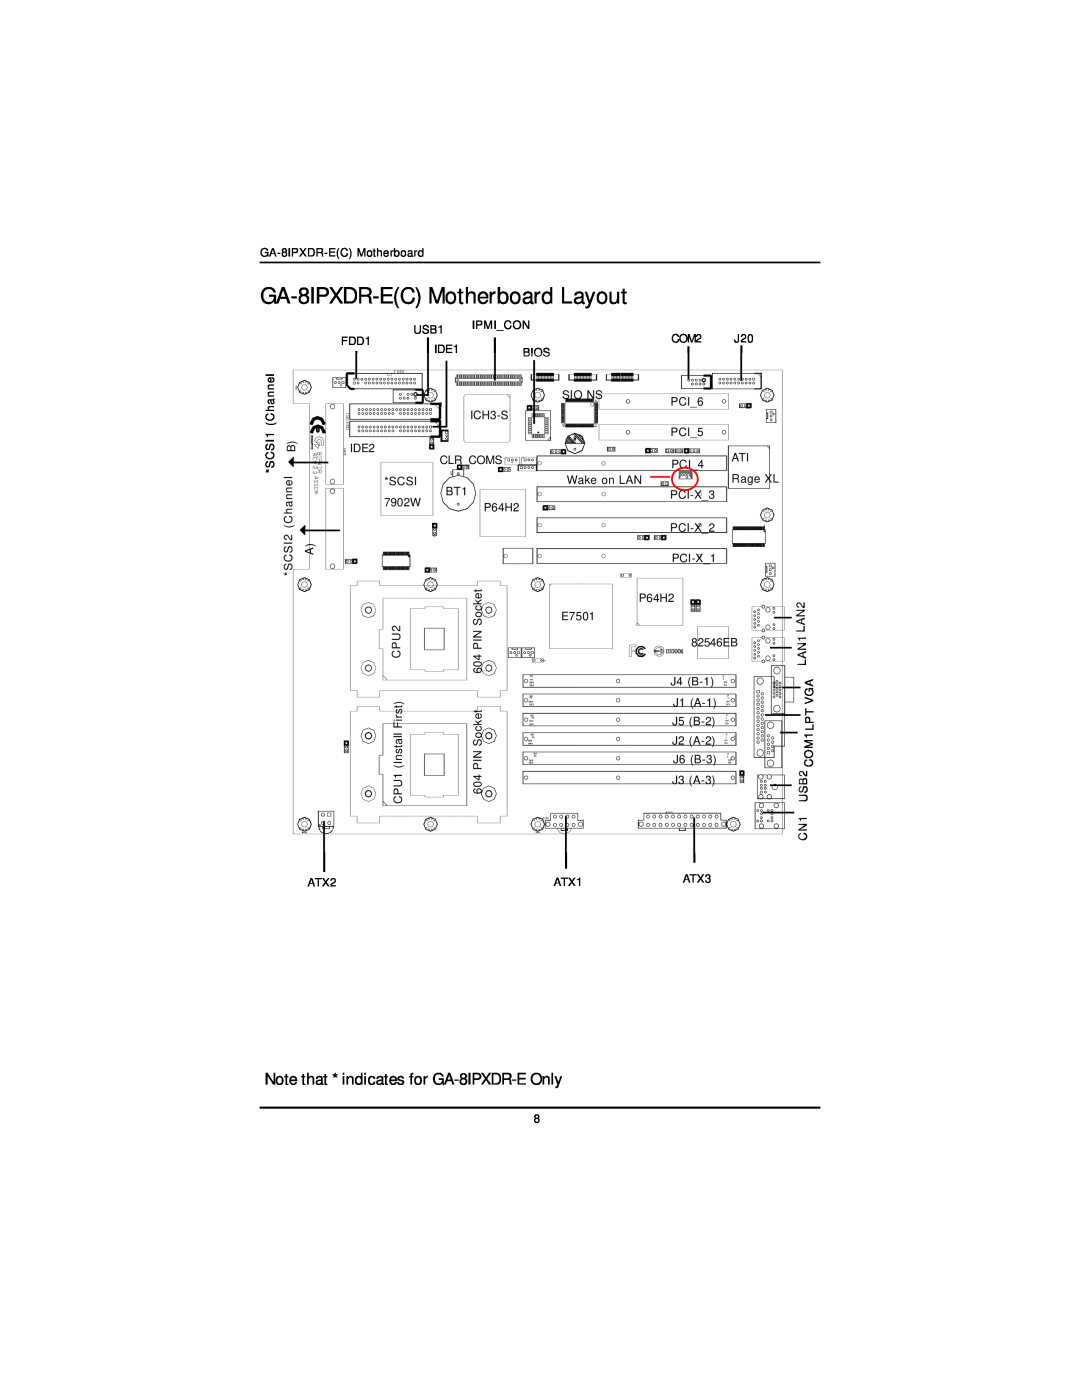 Intel user manual GA-8IPXDR-EC Motherboard Layout, Note that * indicates for GA-8IPXDR-E Only 